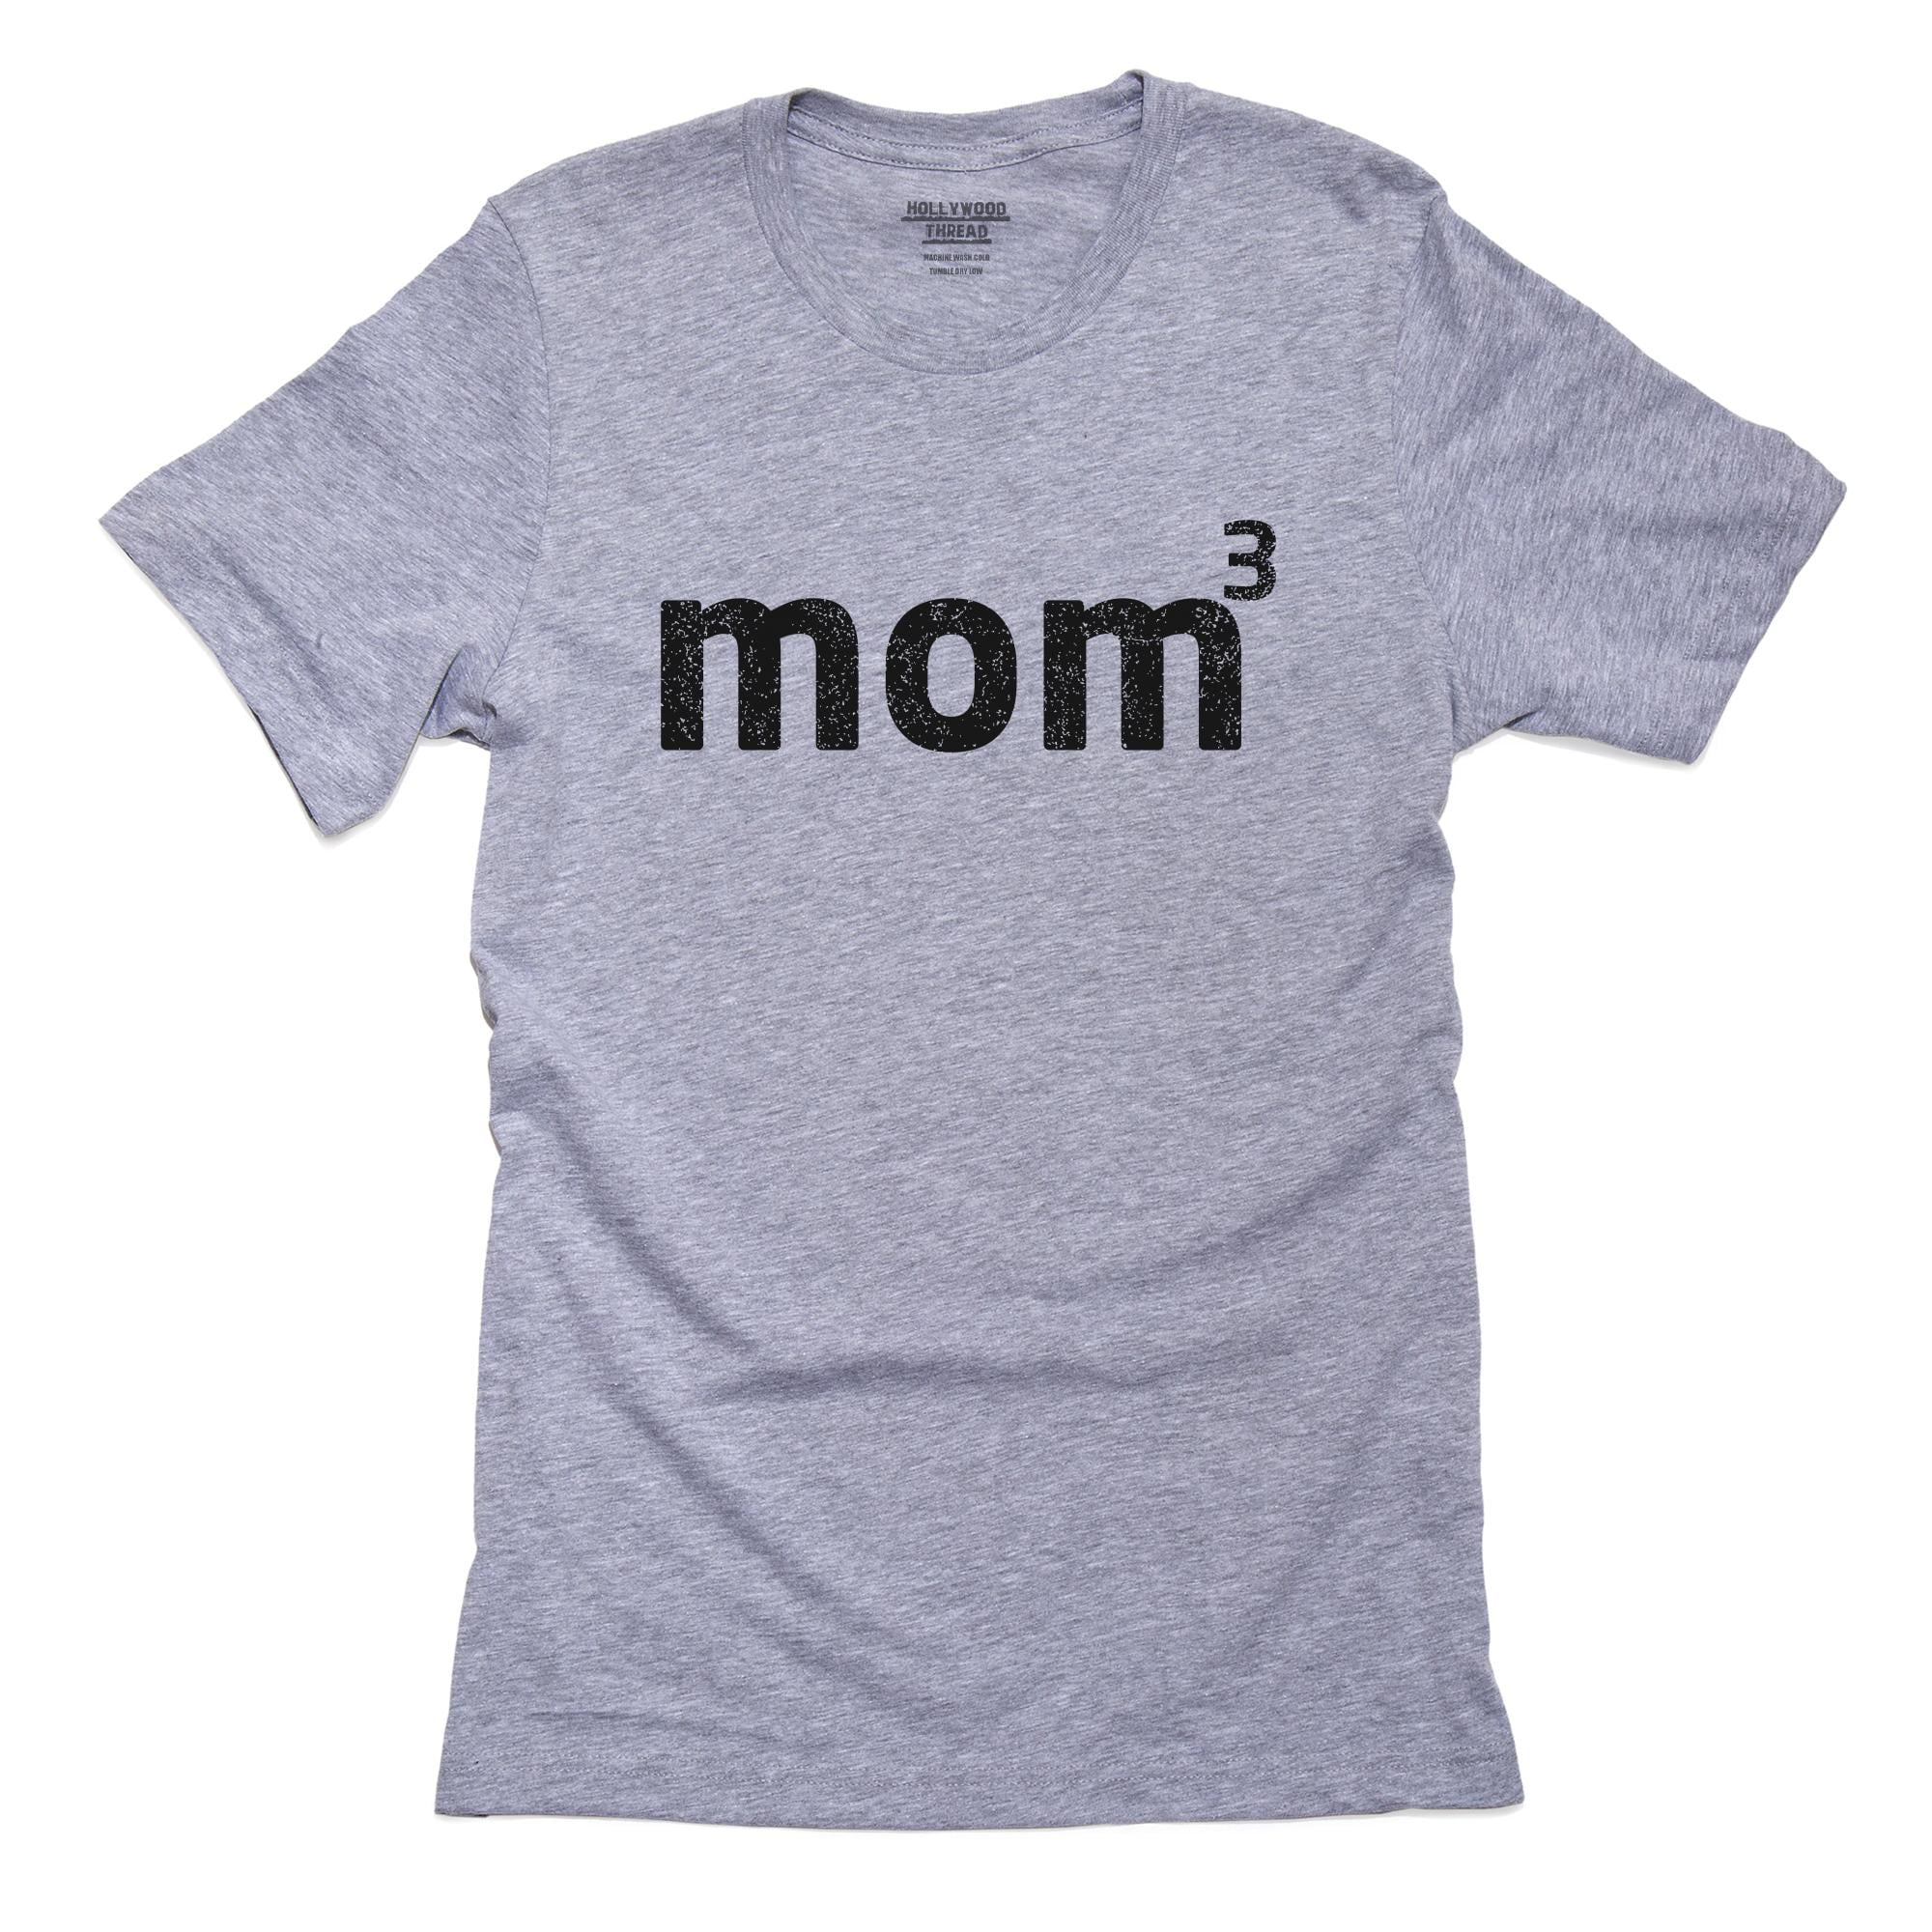 Mom of 3 - Raised to the 3rd Power - Funny Math Men's Grey T-Shirt ...